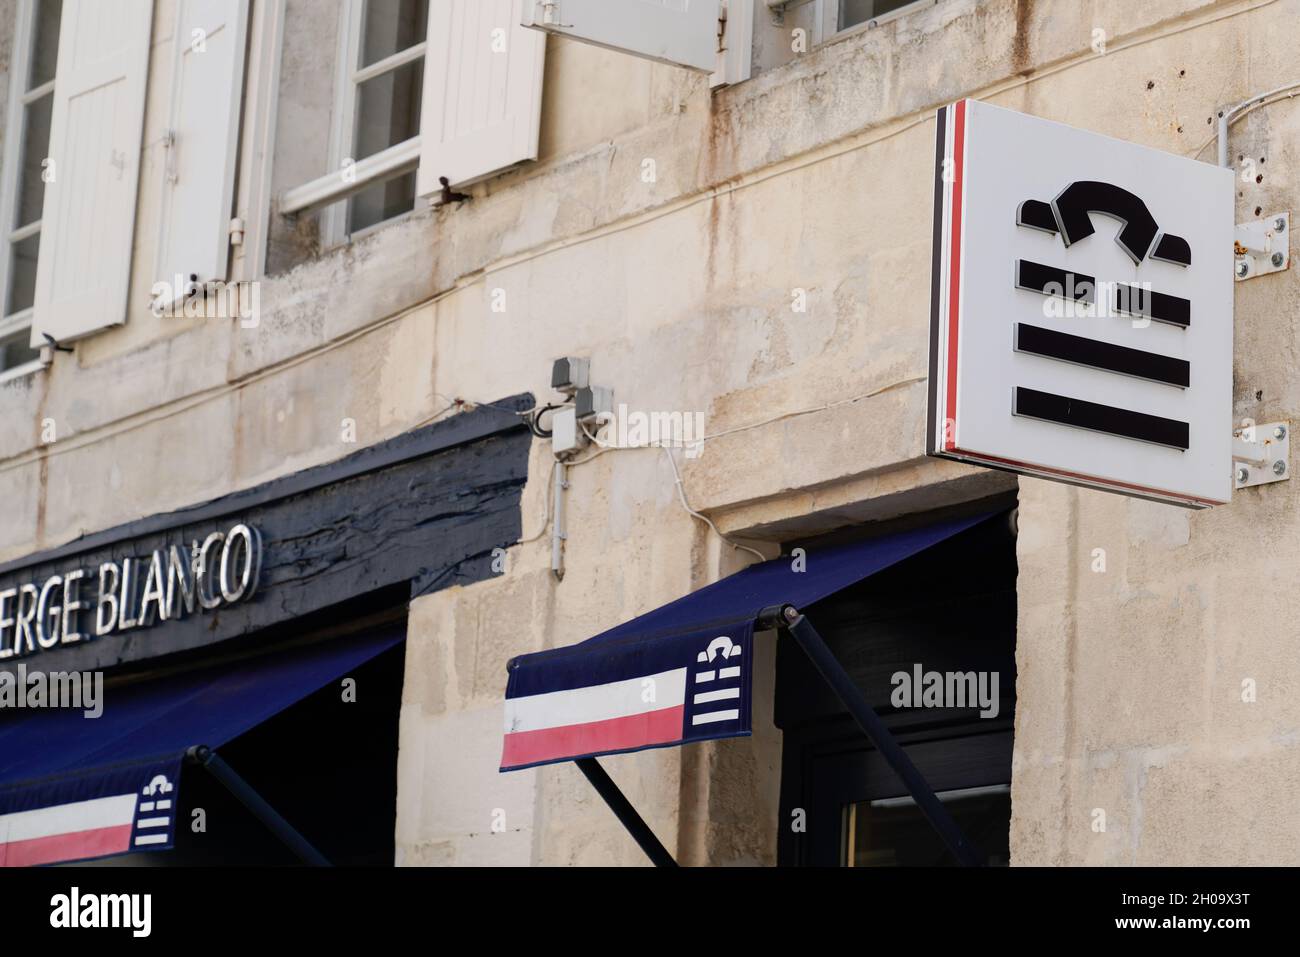 toulouse , occitanie France - 06 25 2021 : serge blanco sign text store and  logo brand shop on facade boutique sport rugby fashion Stock Photo - Alamy